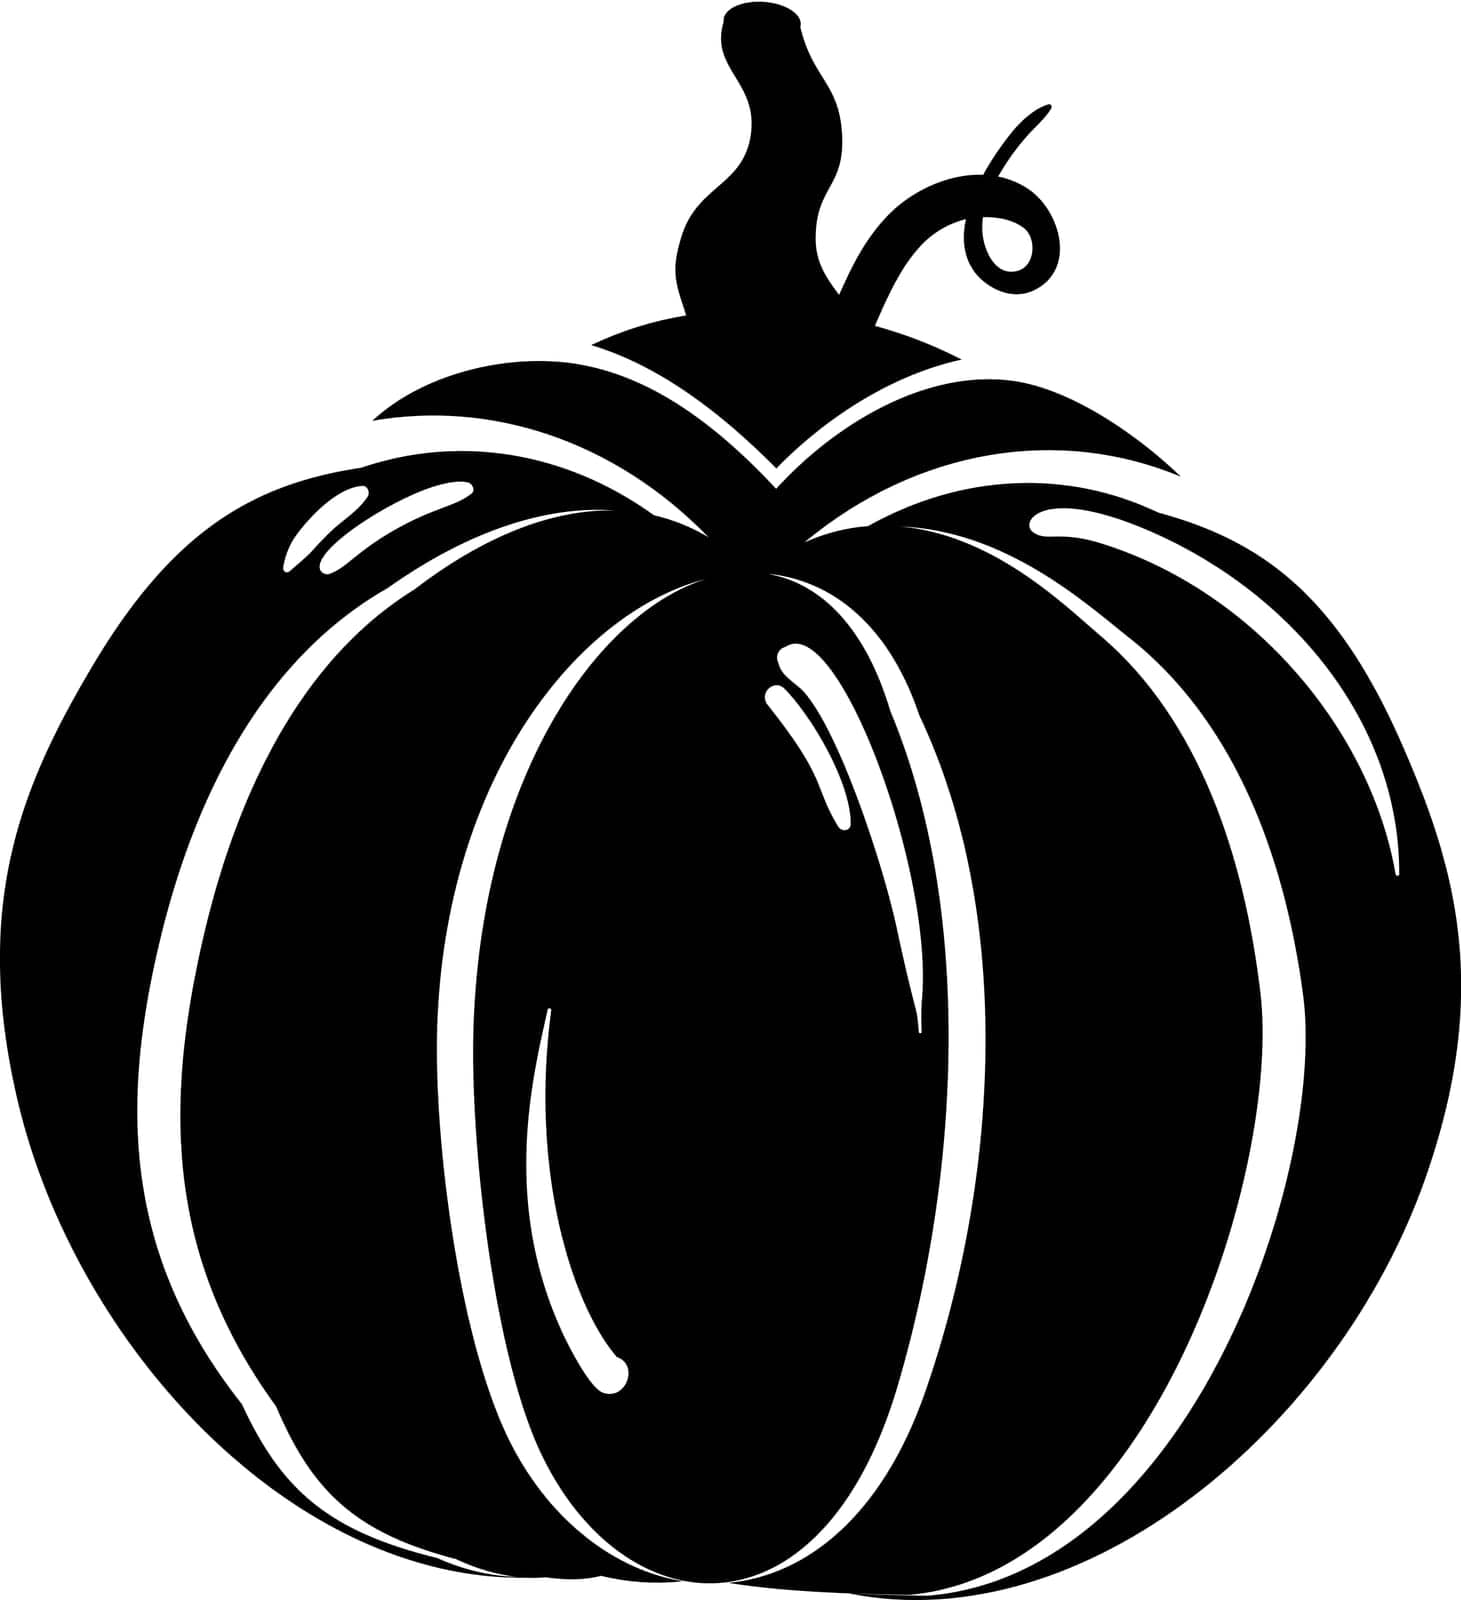 Silhouette of whole pumpkin, element of Thanksgiving day festive table decoration. Whole pumpkin contour holiday symbol. Simple black shape vector icon isolated on white background